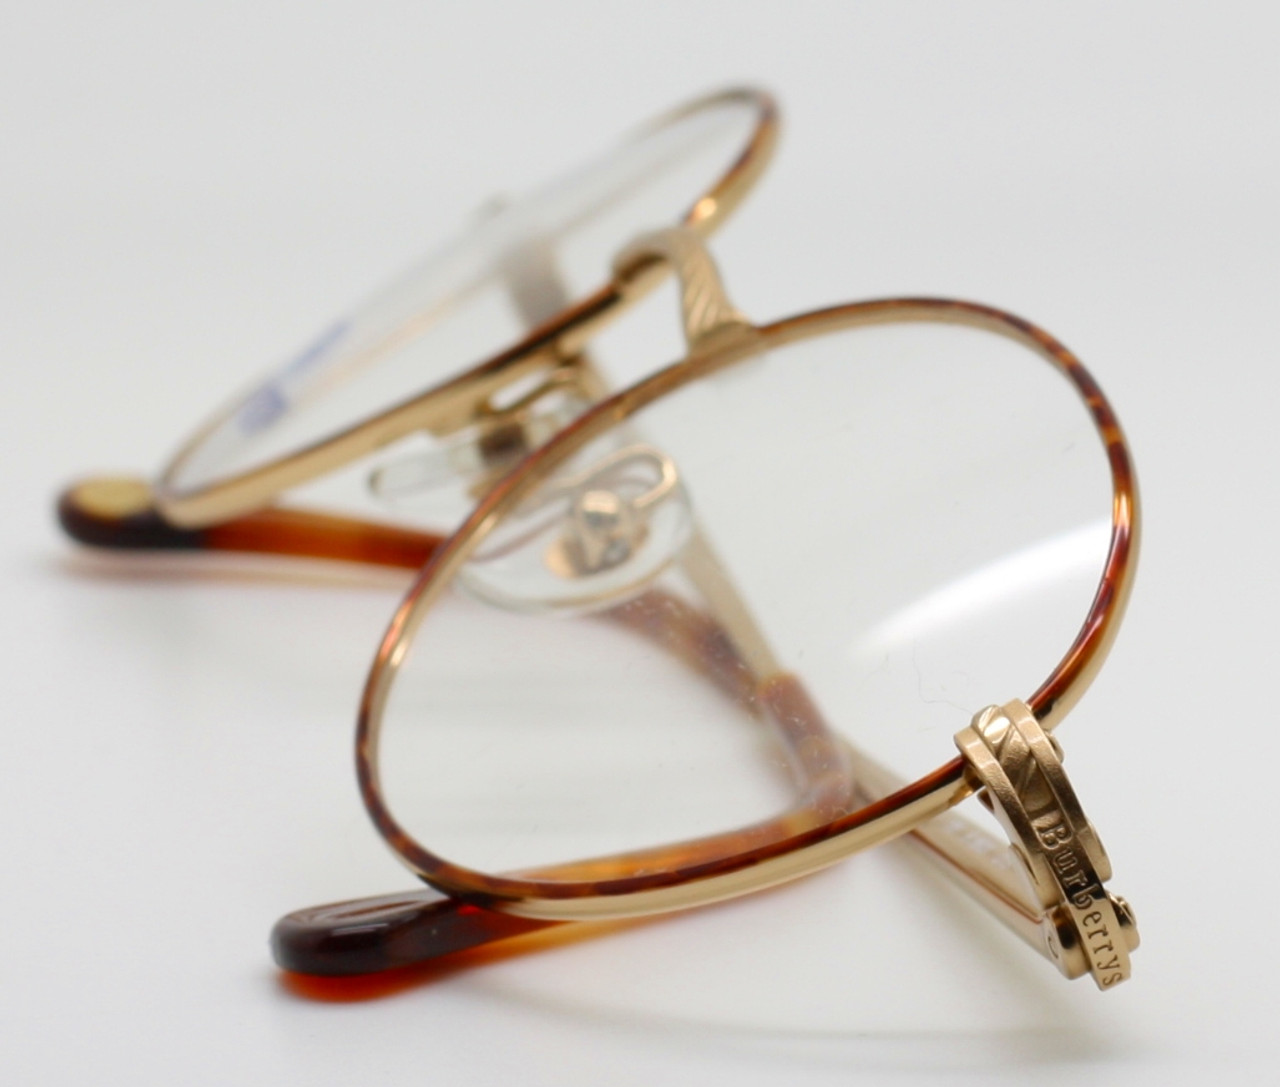 Burberry B8803 Gold and Tortoiseshell Oval Glasses with Tortoiseshell ear pieces